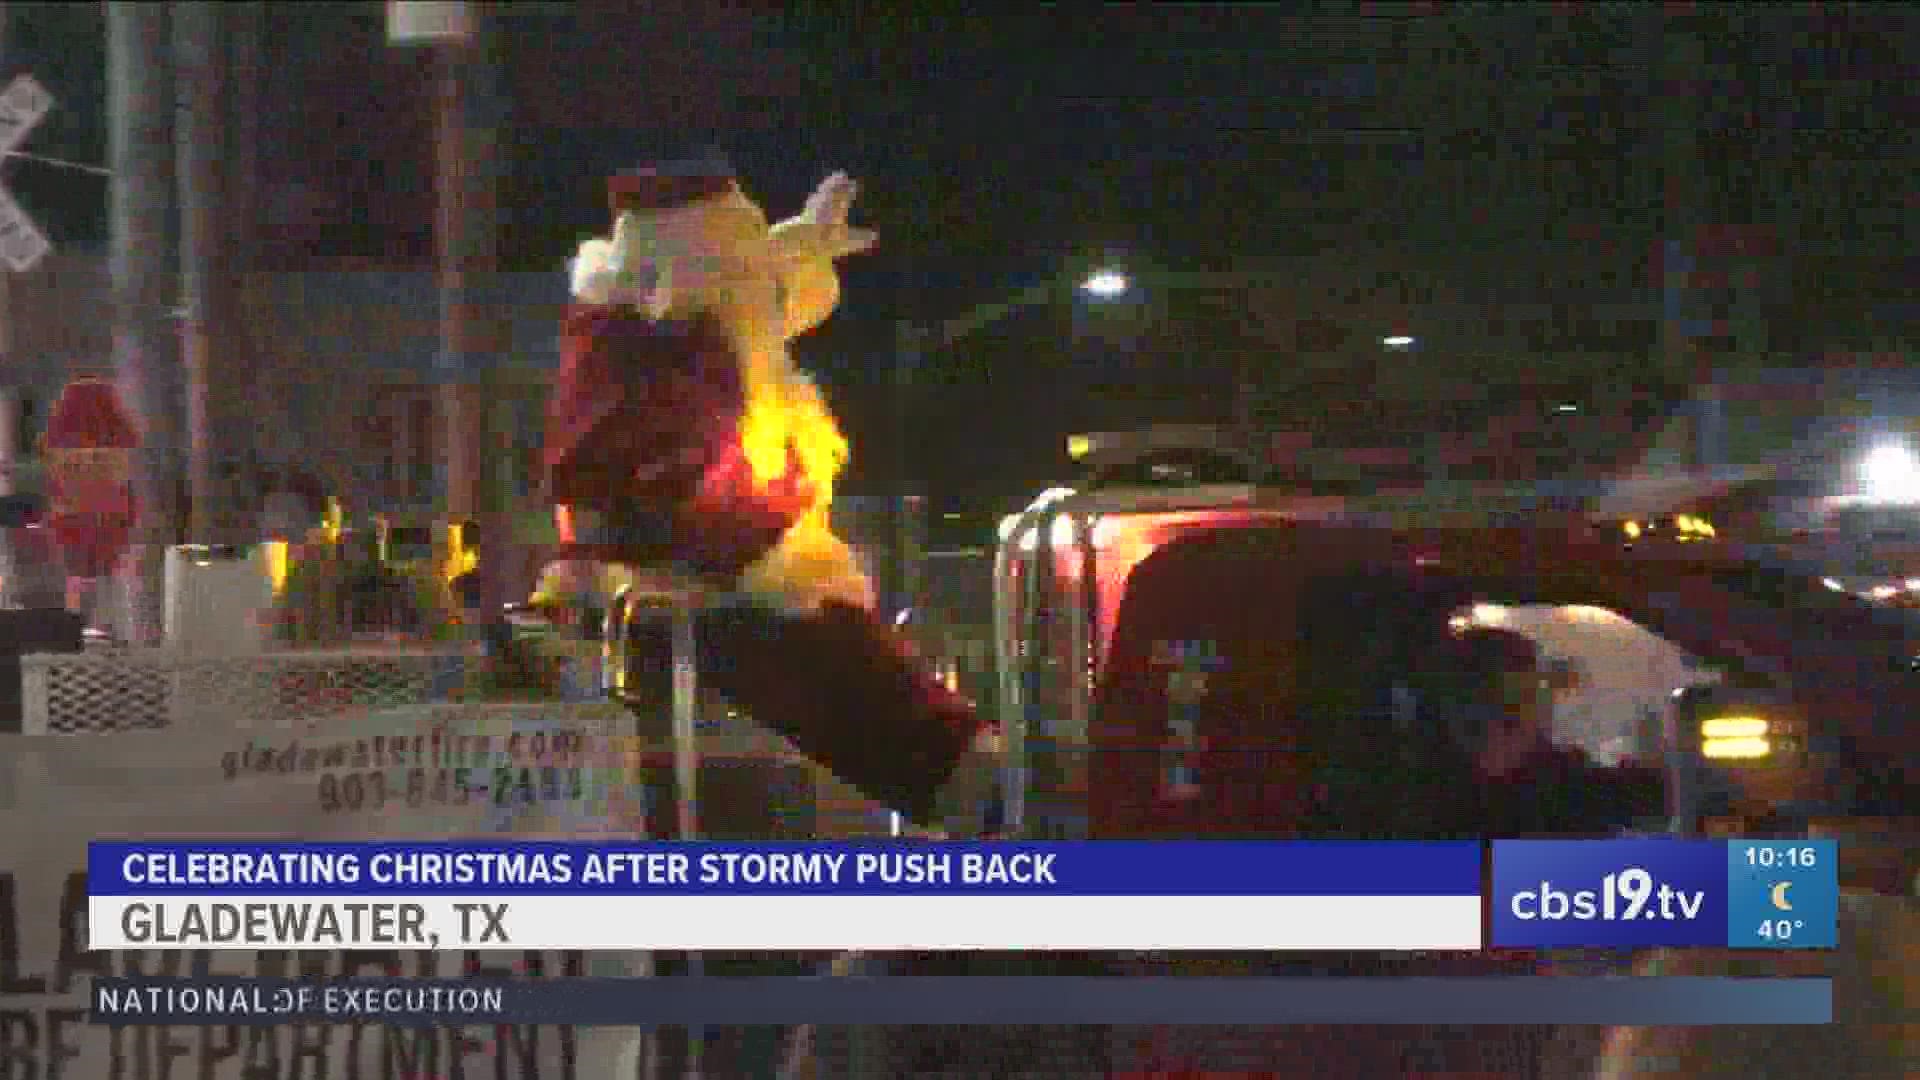 City of Gladewater rings in the Christmas spirit